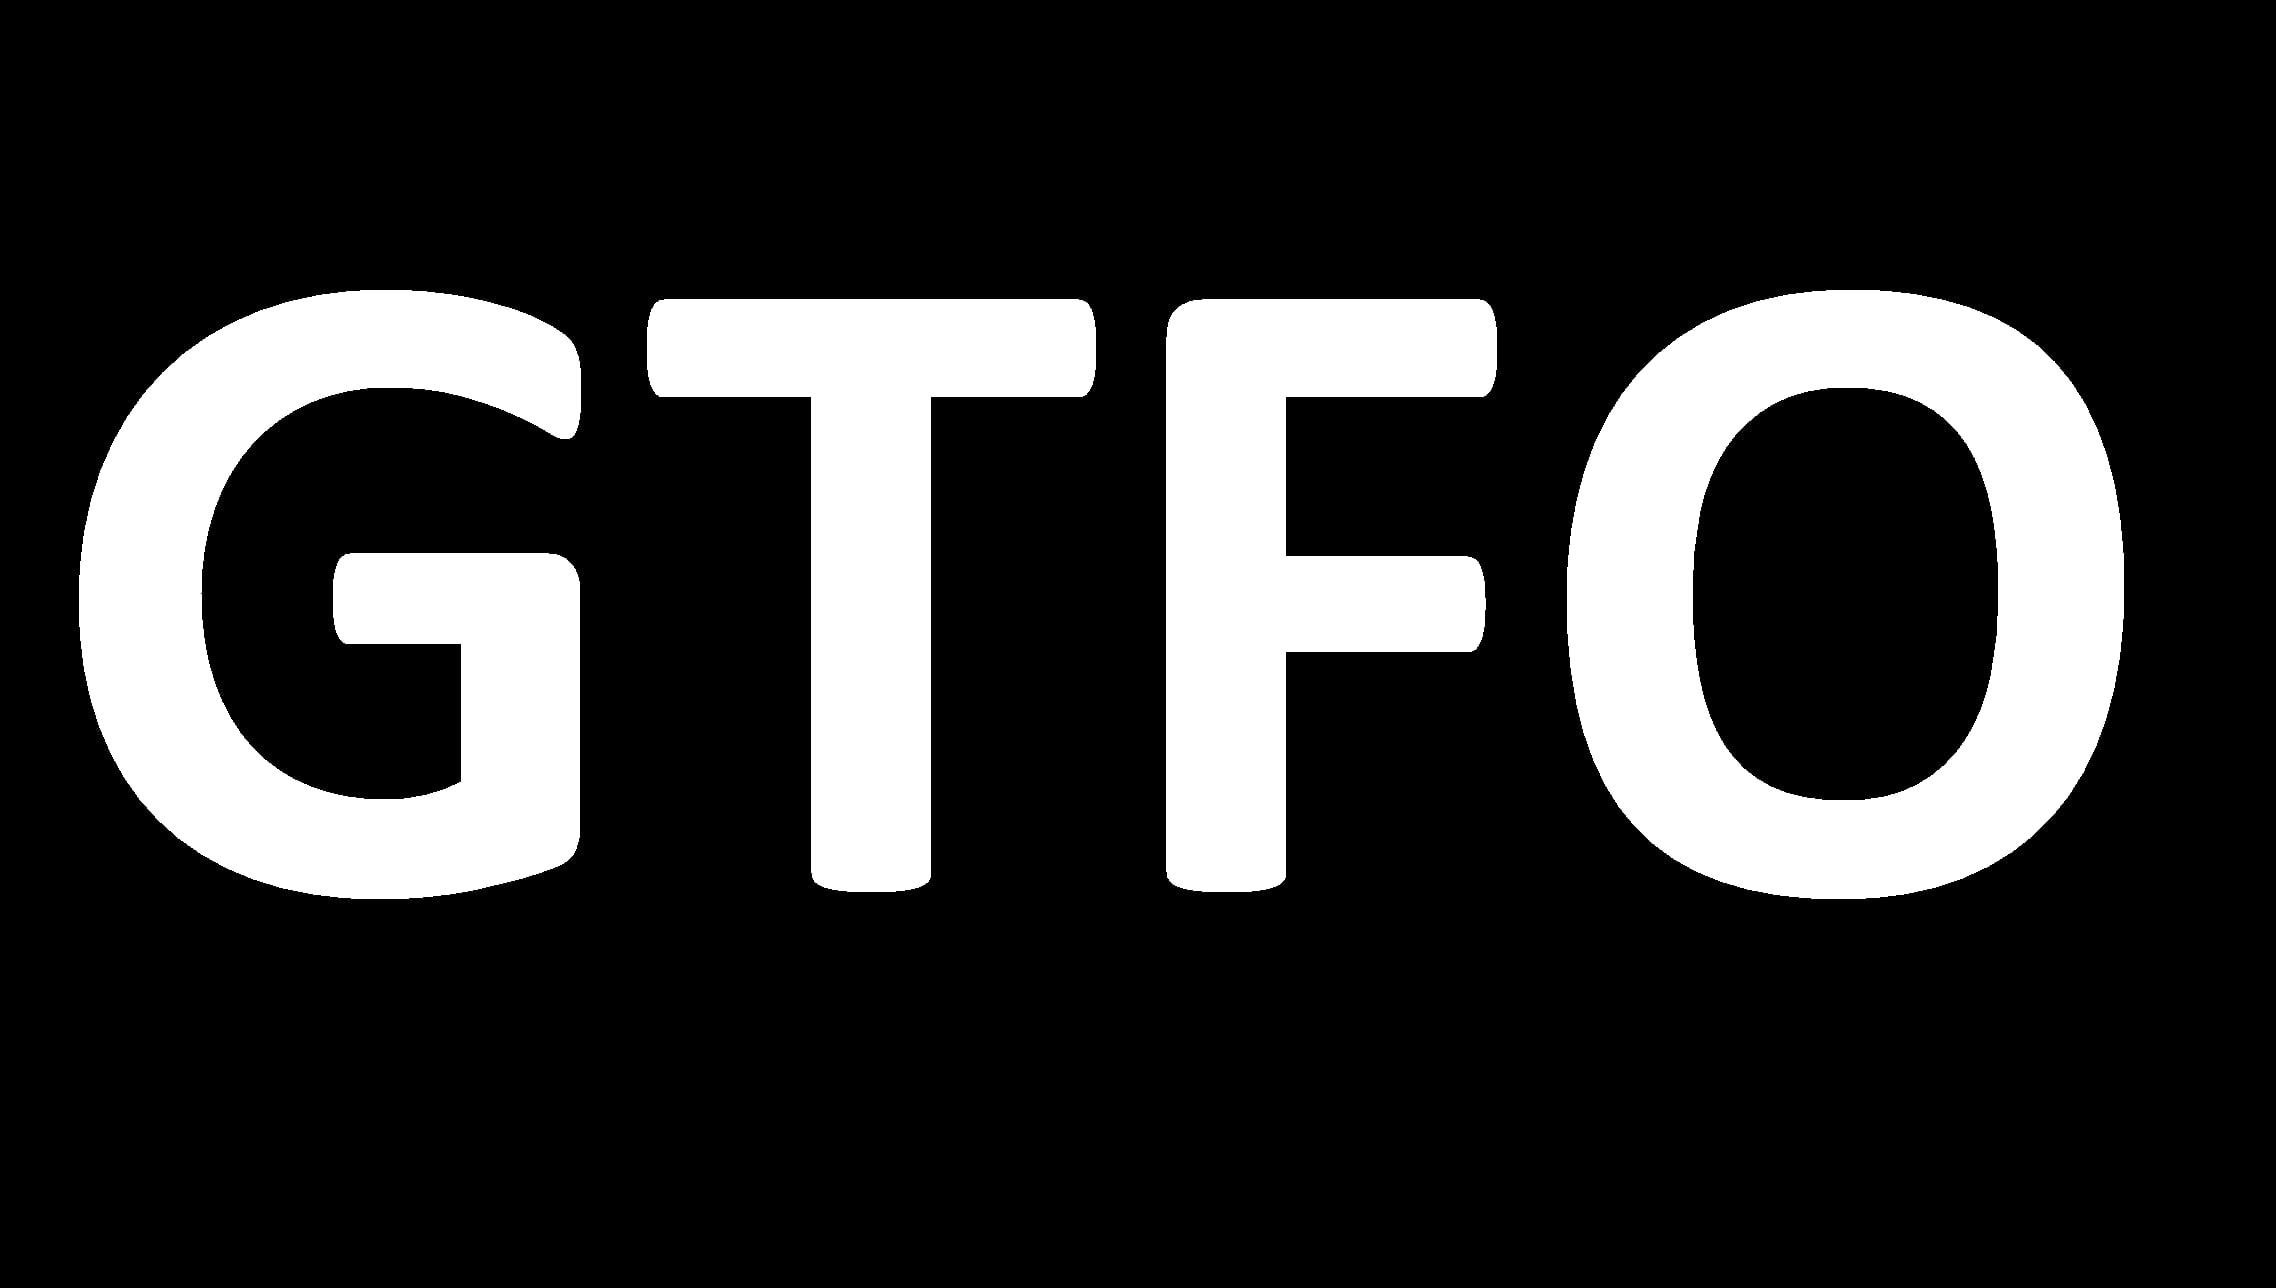 black background with GTFO text overlay, memes, humor, typography, minimalism